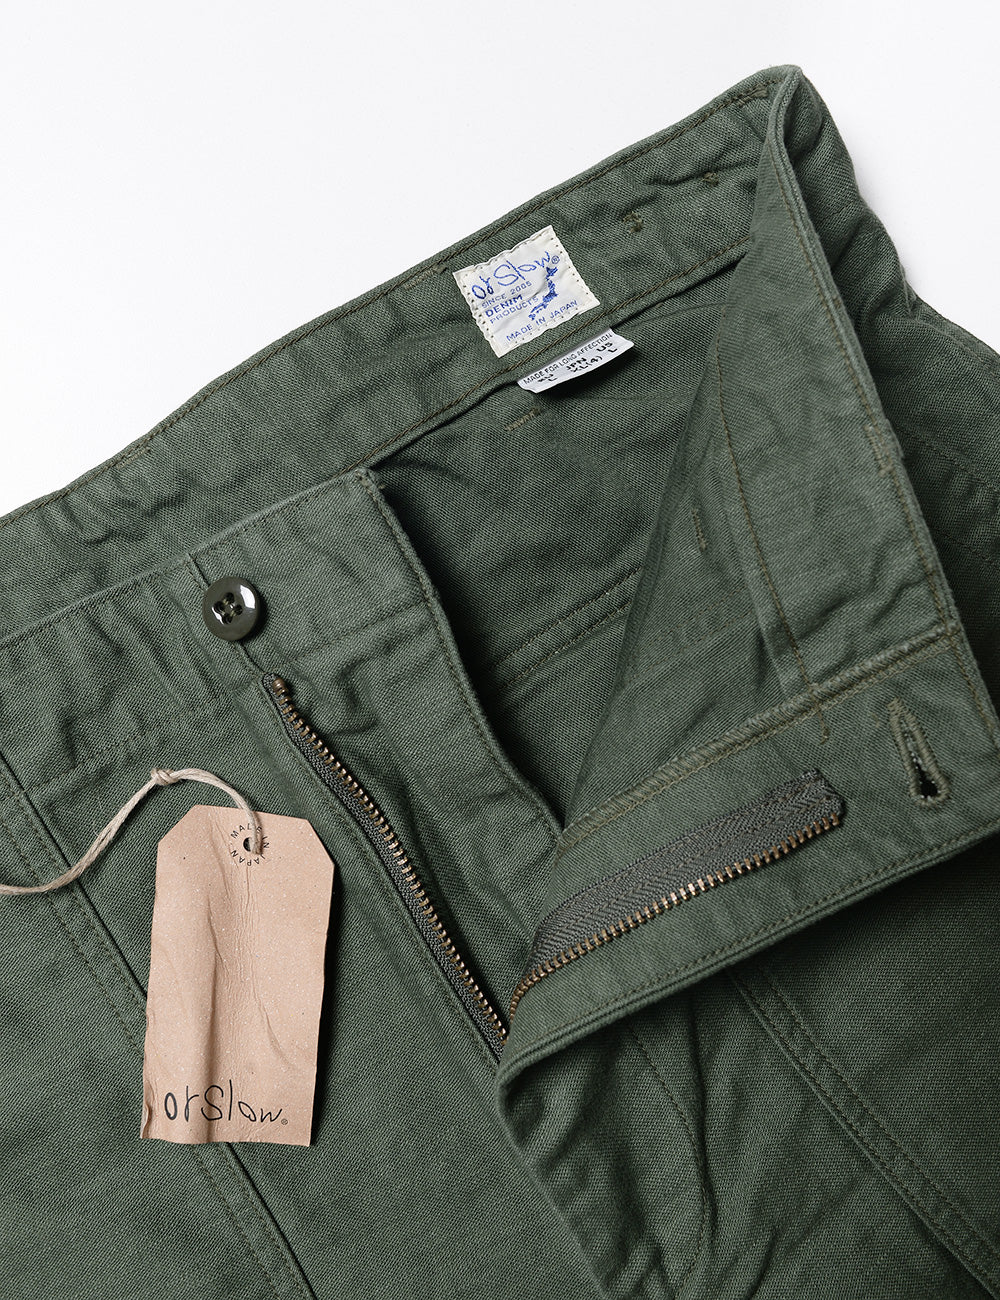 Detail of Orslow US Army Fatigue Shorts  - Army Green with open fly